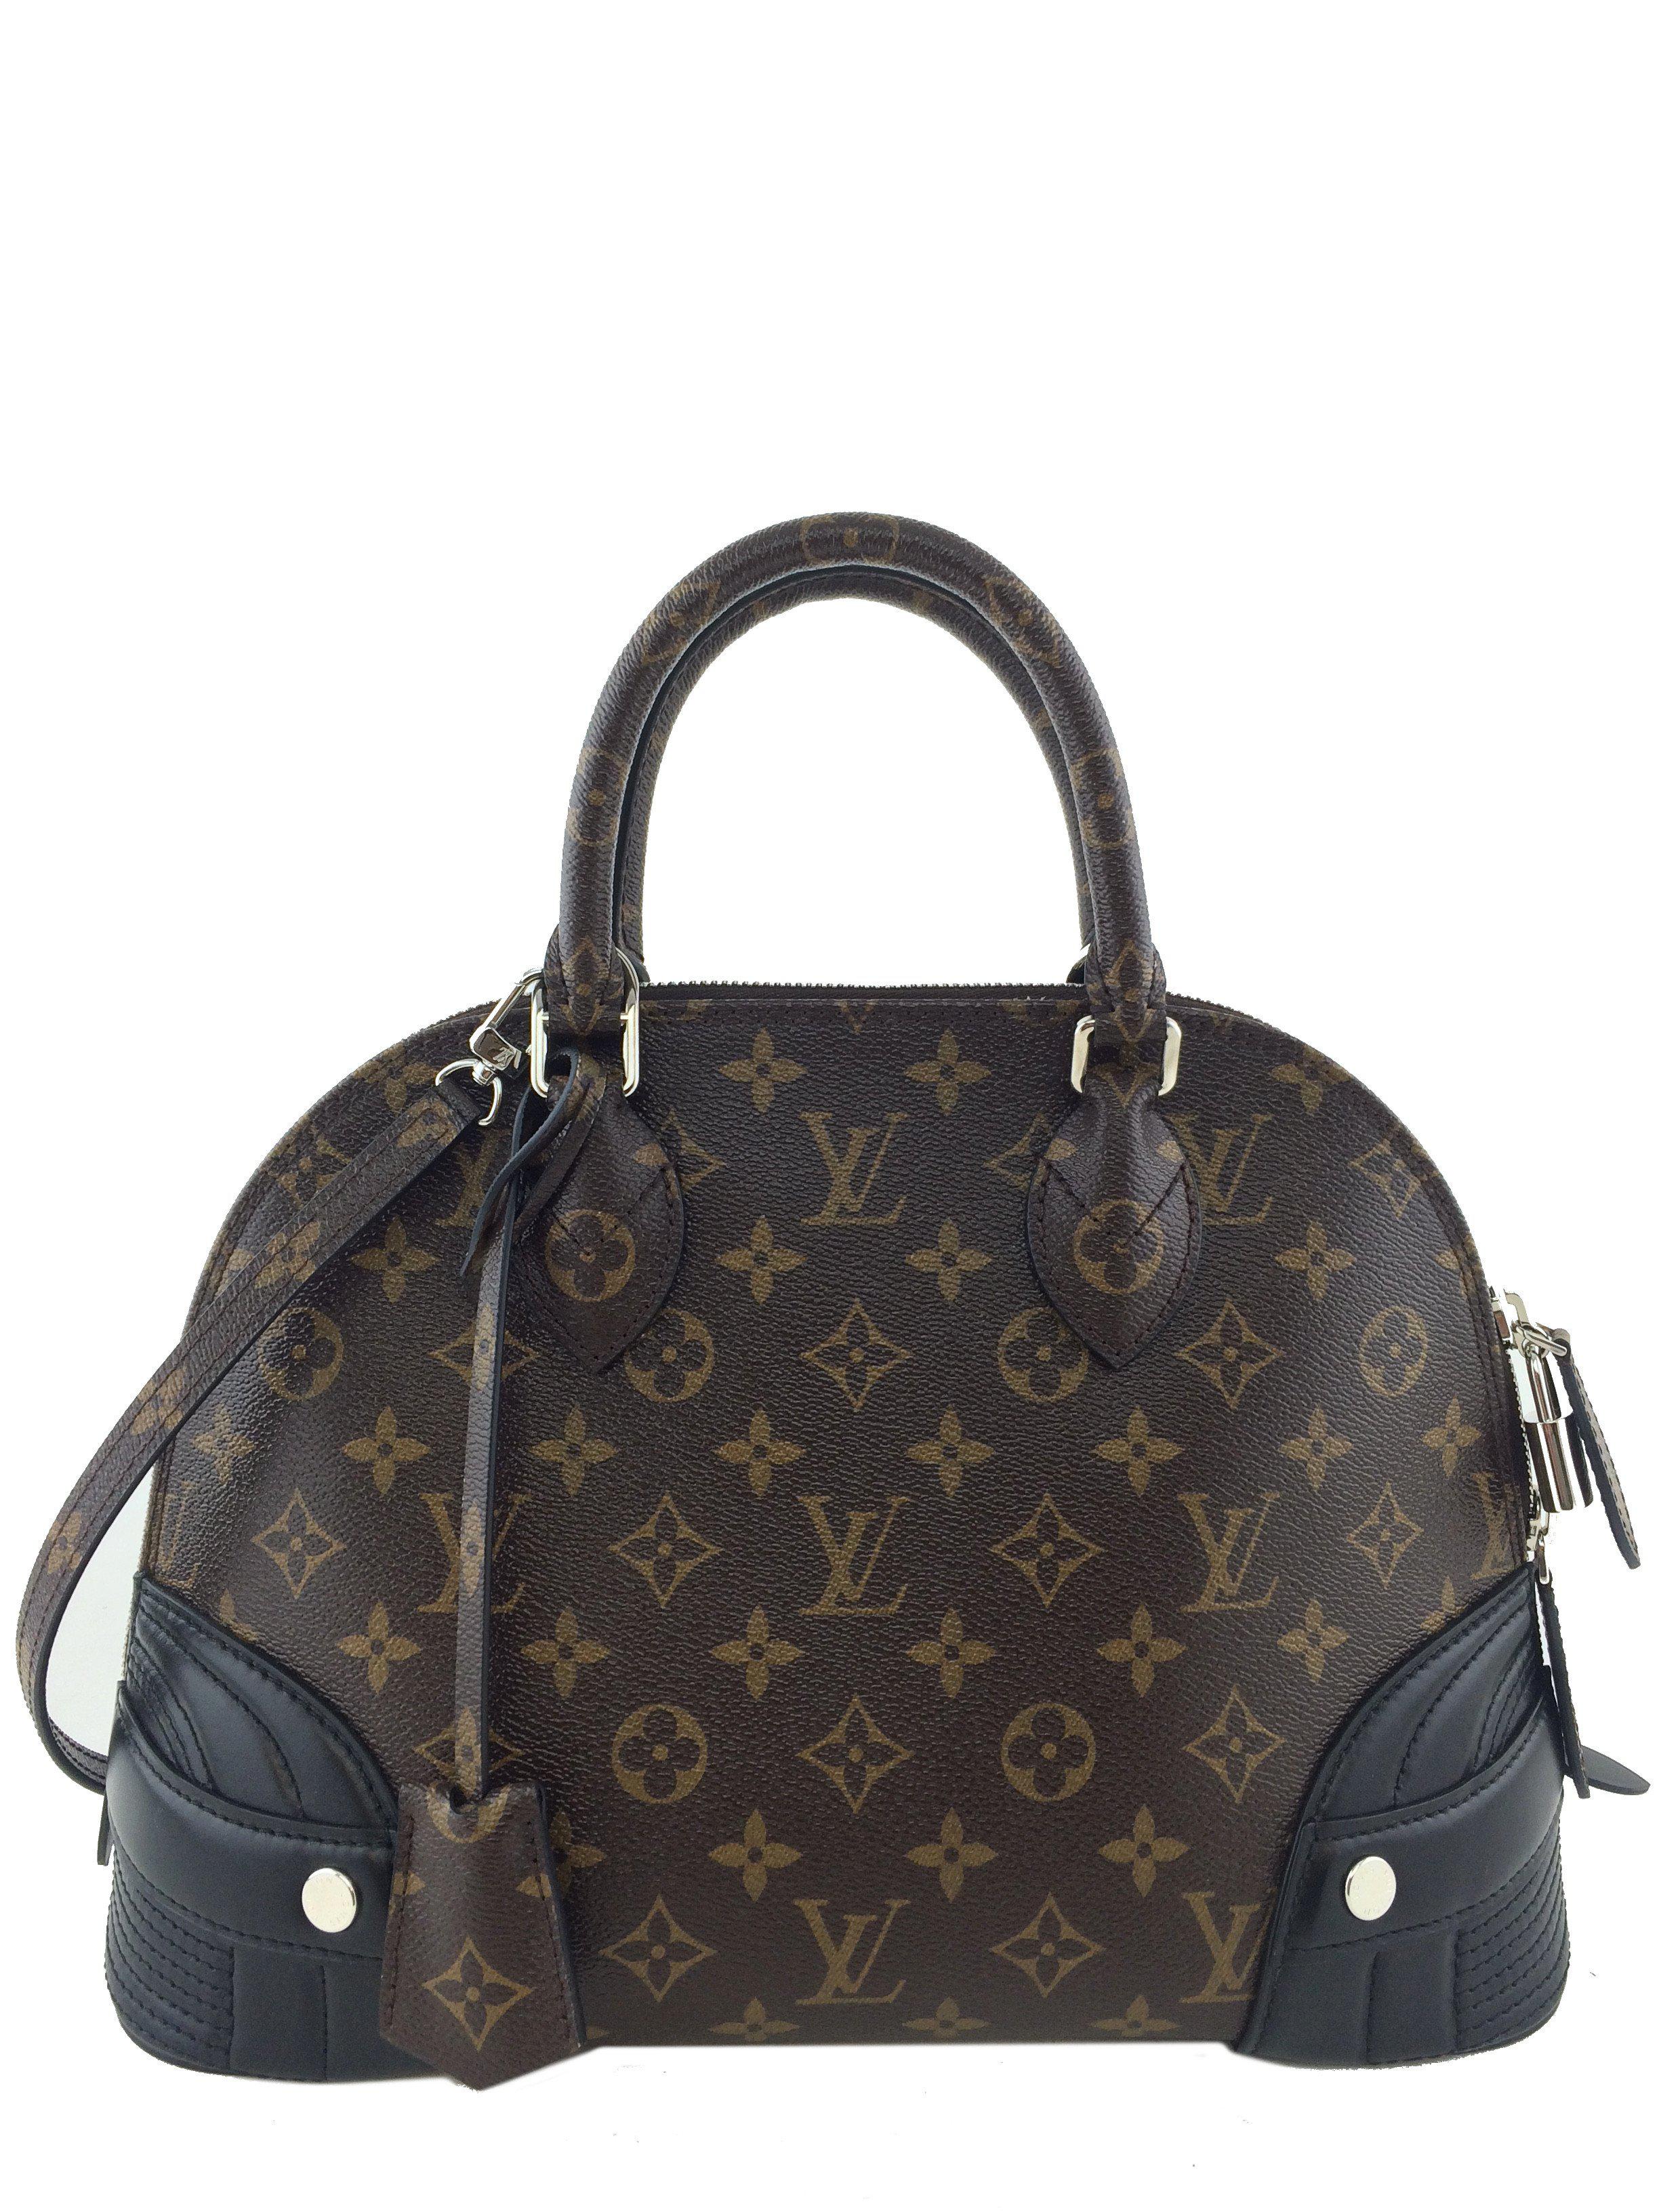 Louis Vuitton Canvas Exterior Quilted Bags & Handbags for Women